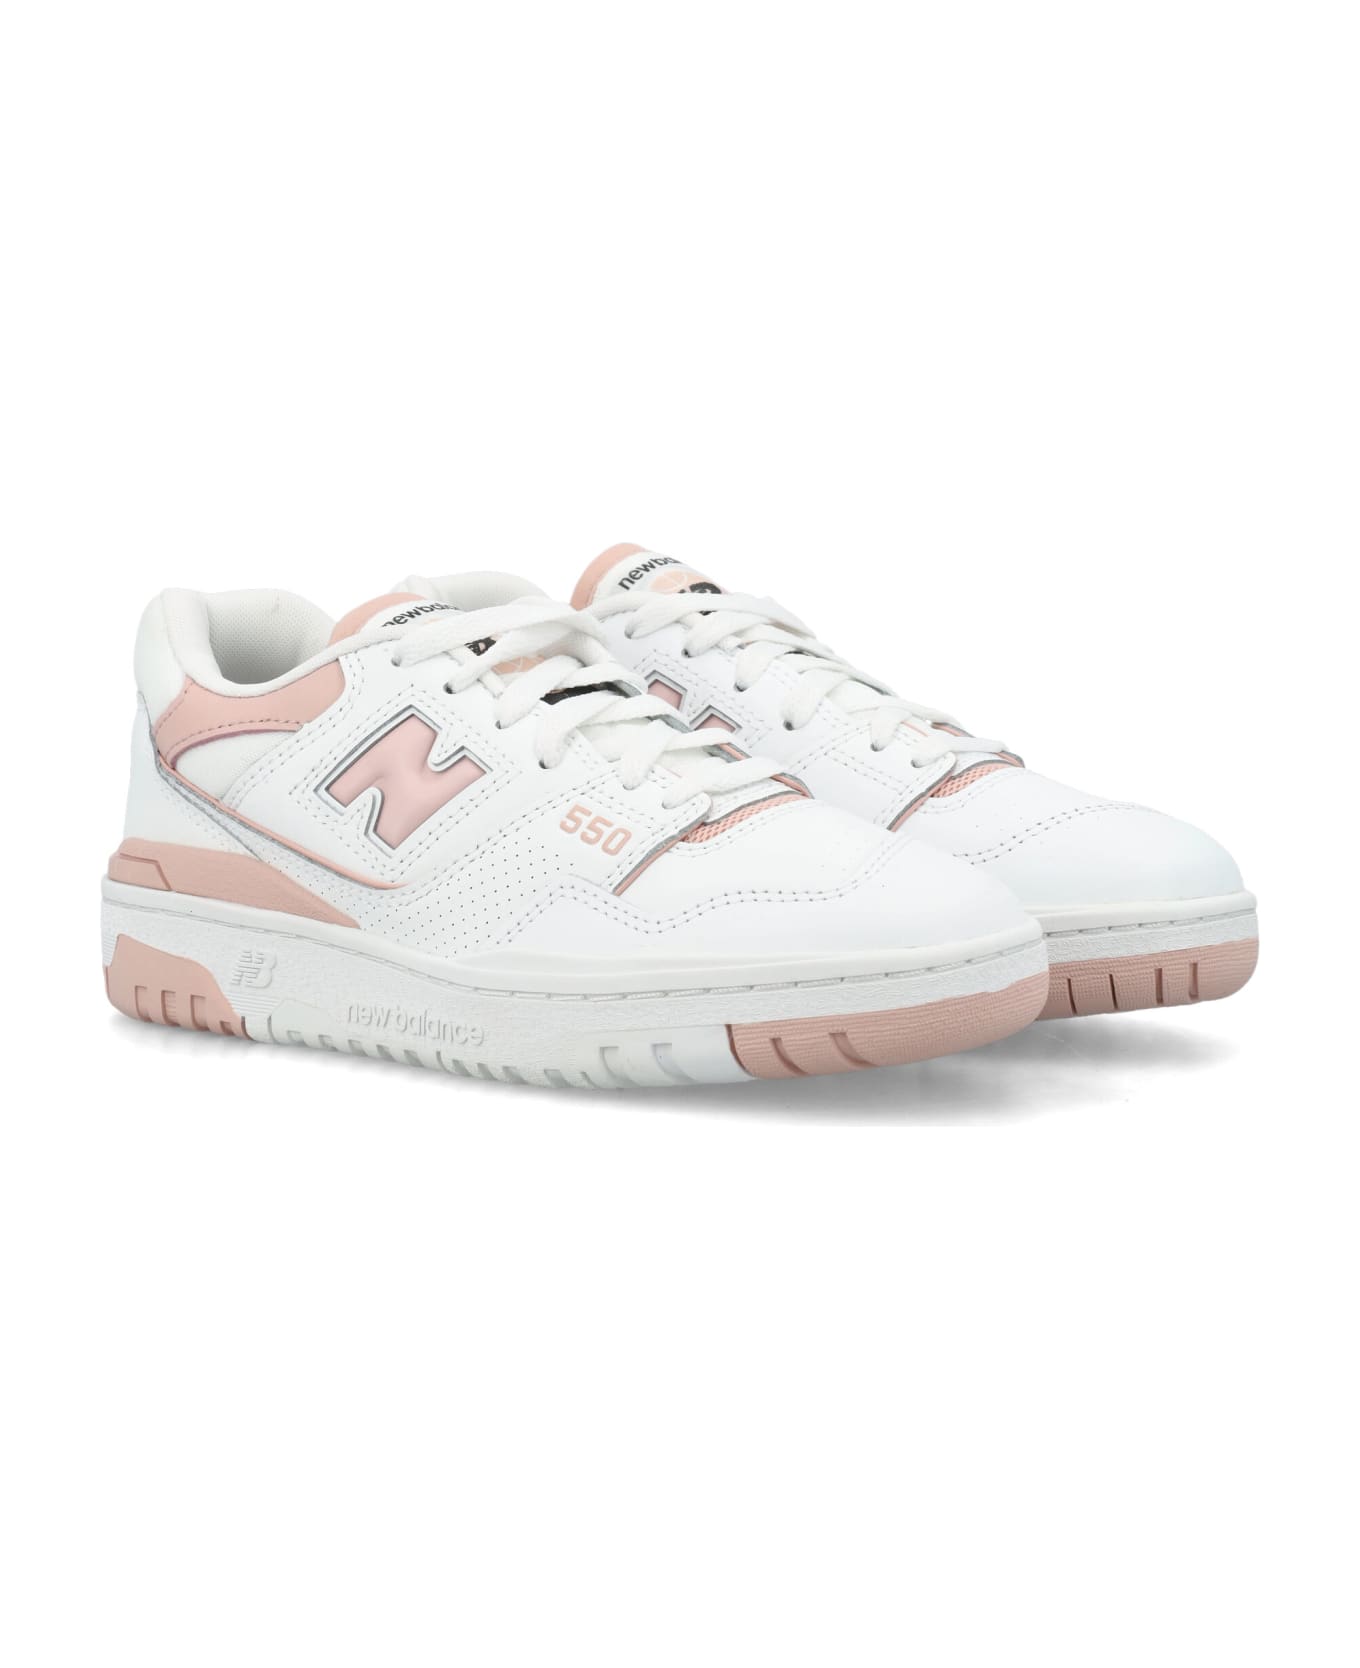 New Balance 550 Woman's Sneakers - WHITE PINK スニーカー